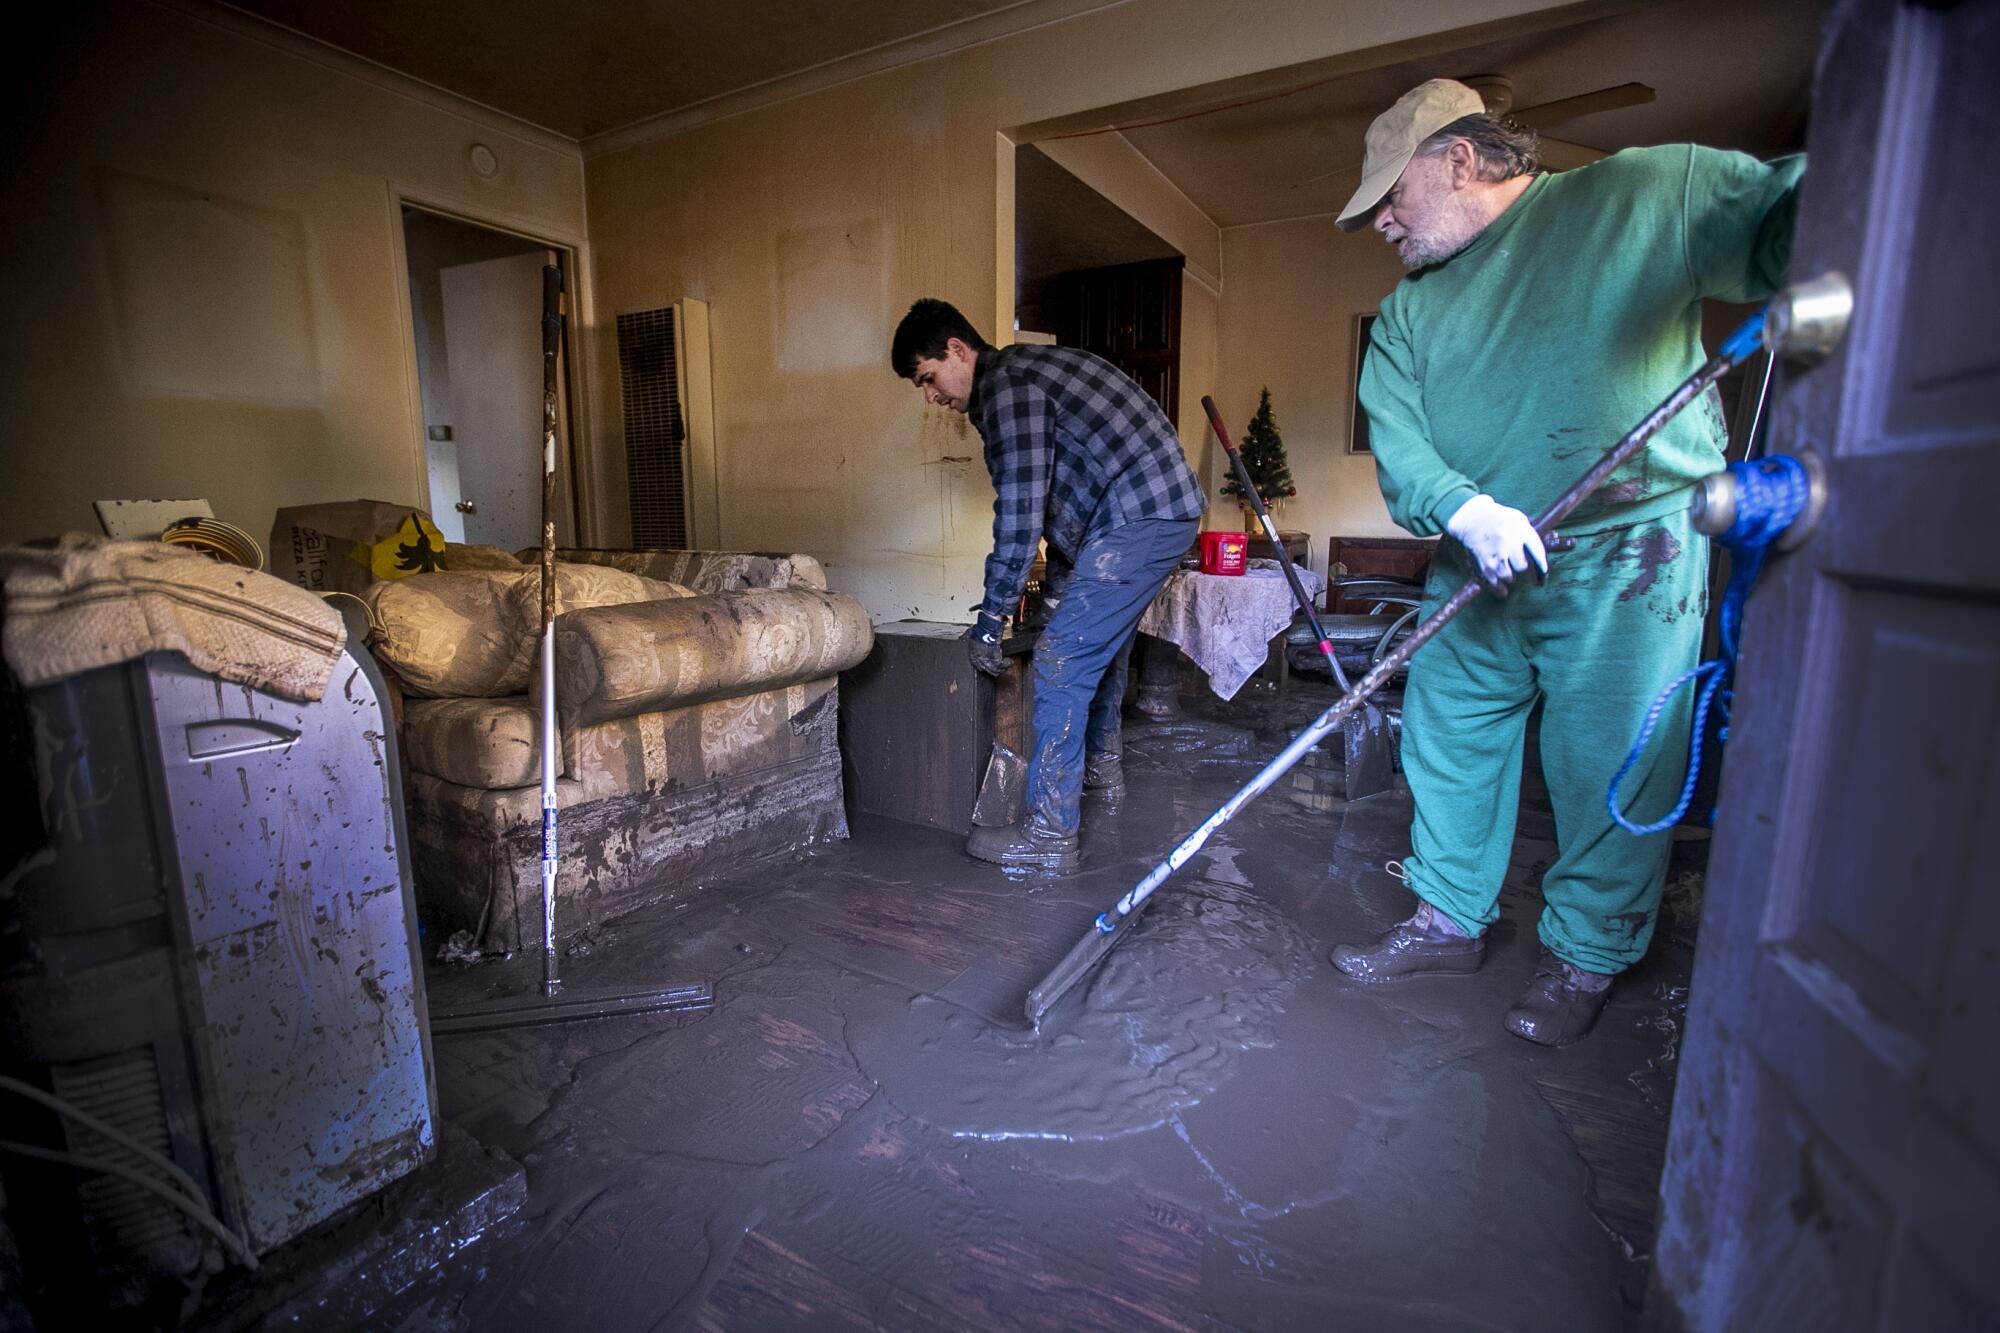 Two men stand on a room's muddy floor